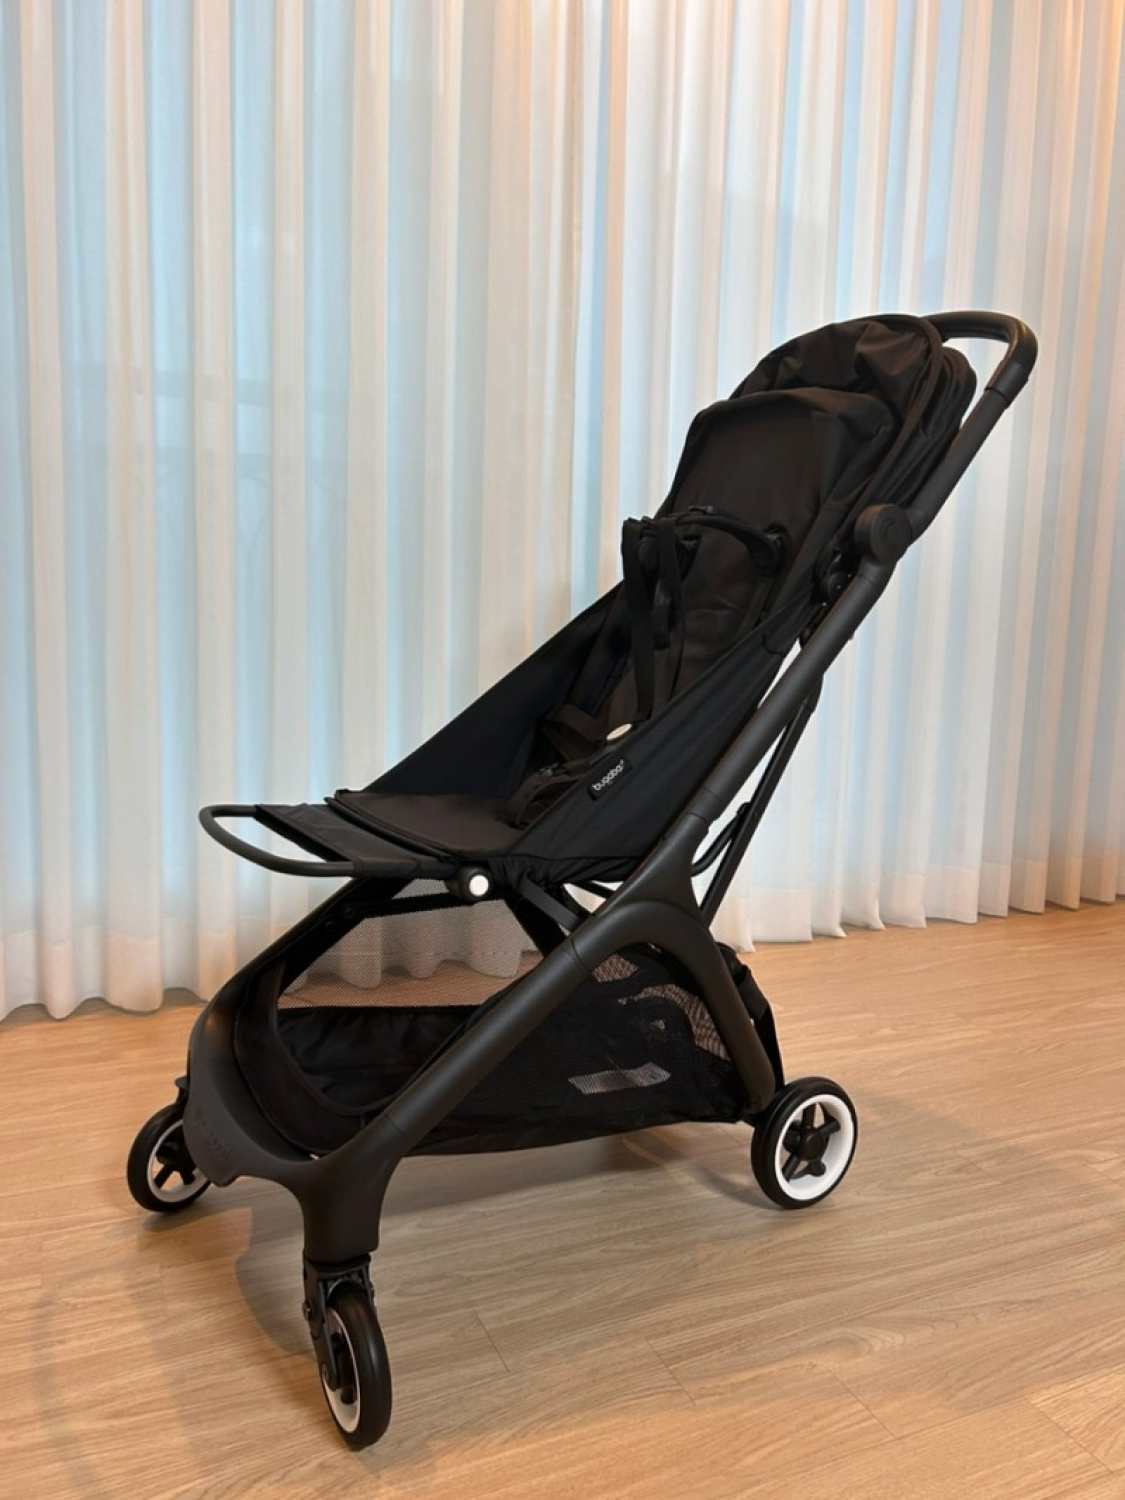 Bugaboo Butterfly seat stroller Stormy blue sun canopy, stormy blue  fabrics, black chassis